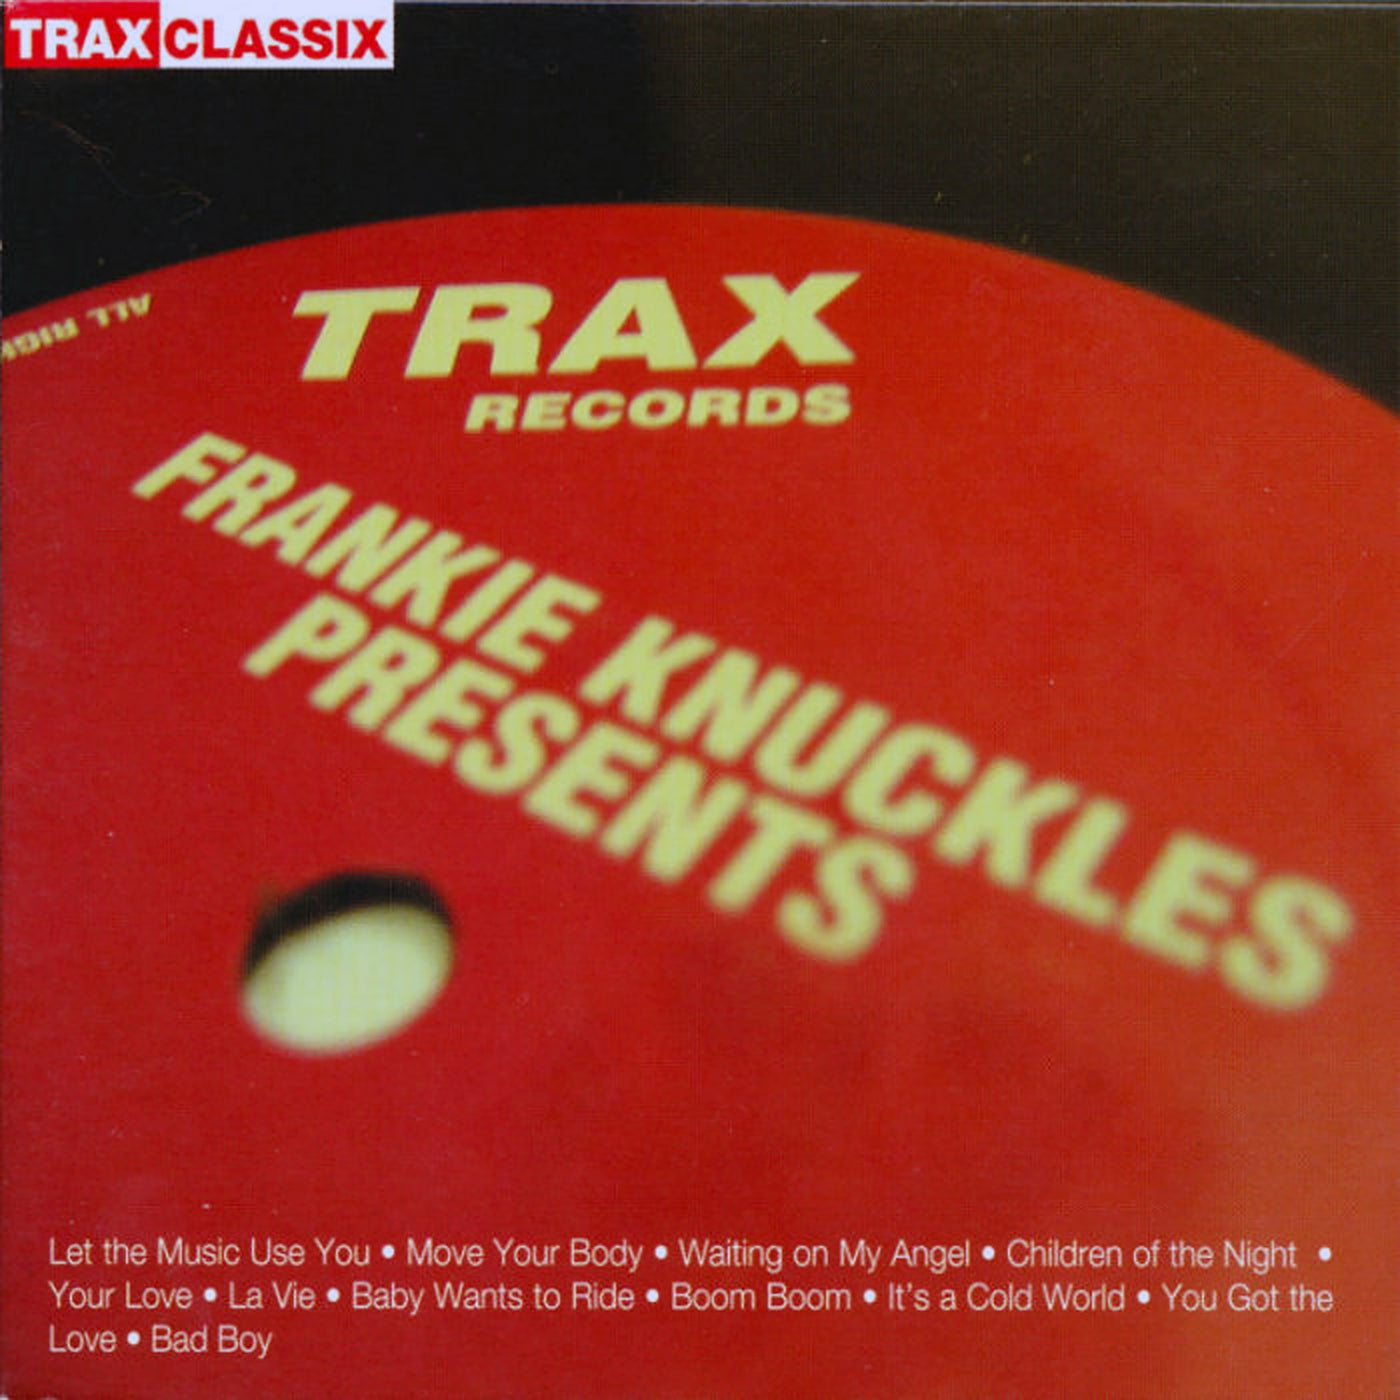 Frankie Knuckles Presents: His Greatest Hits from Trax Records